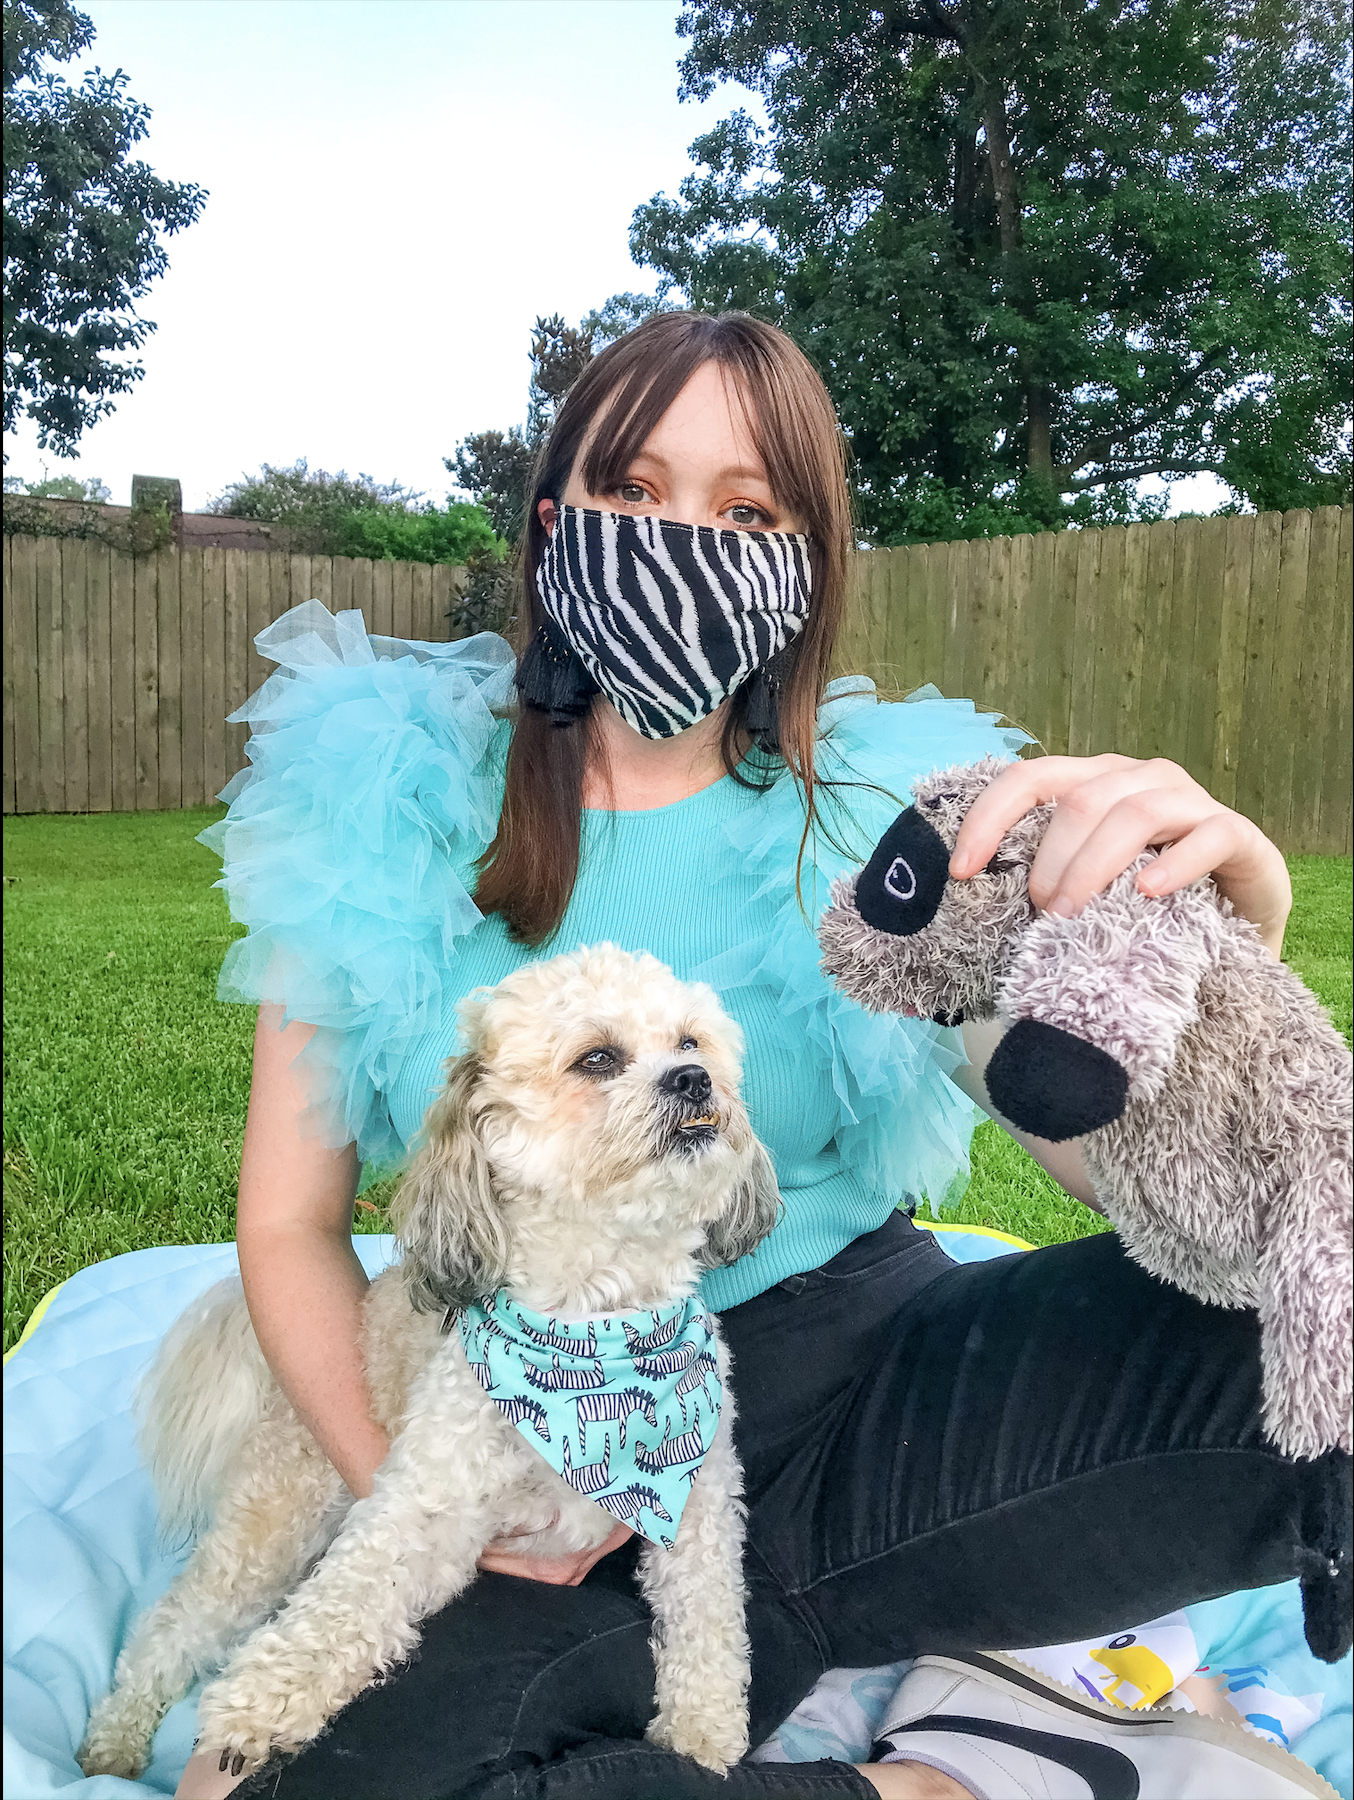 MASK UP! FUN MASK OPTIONS TO TWIN WITH YOUR PUP.